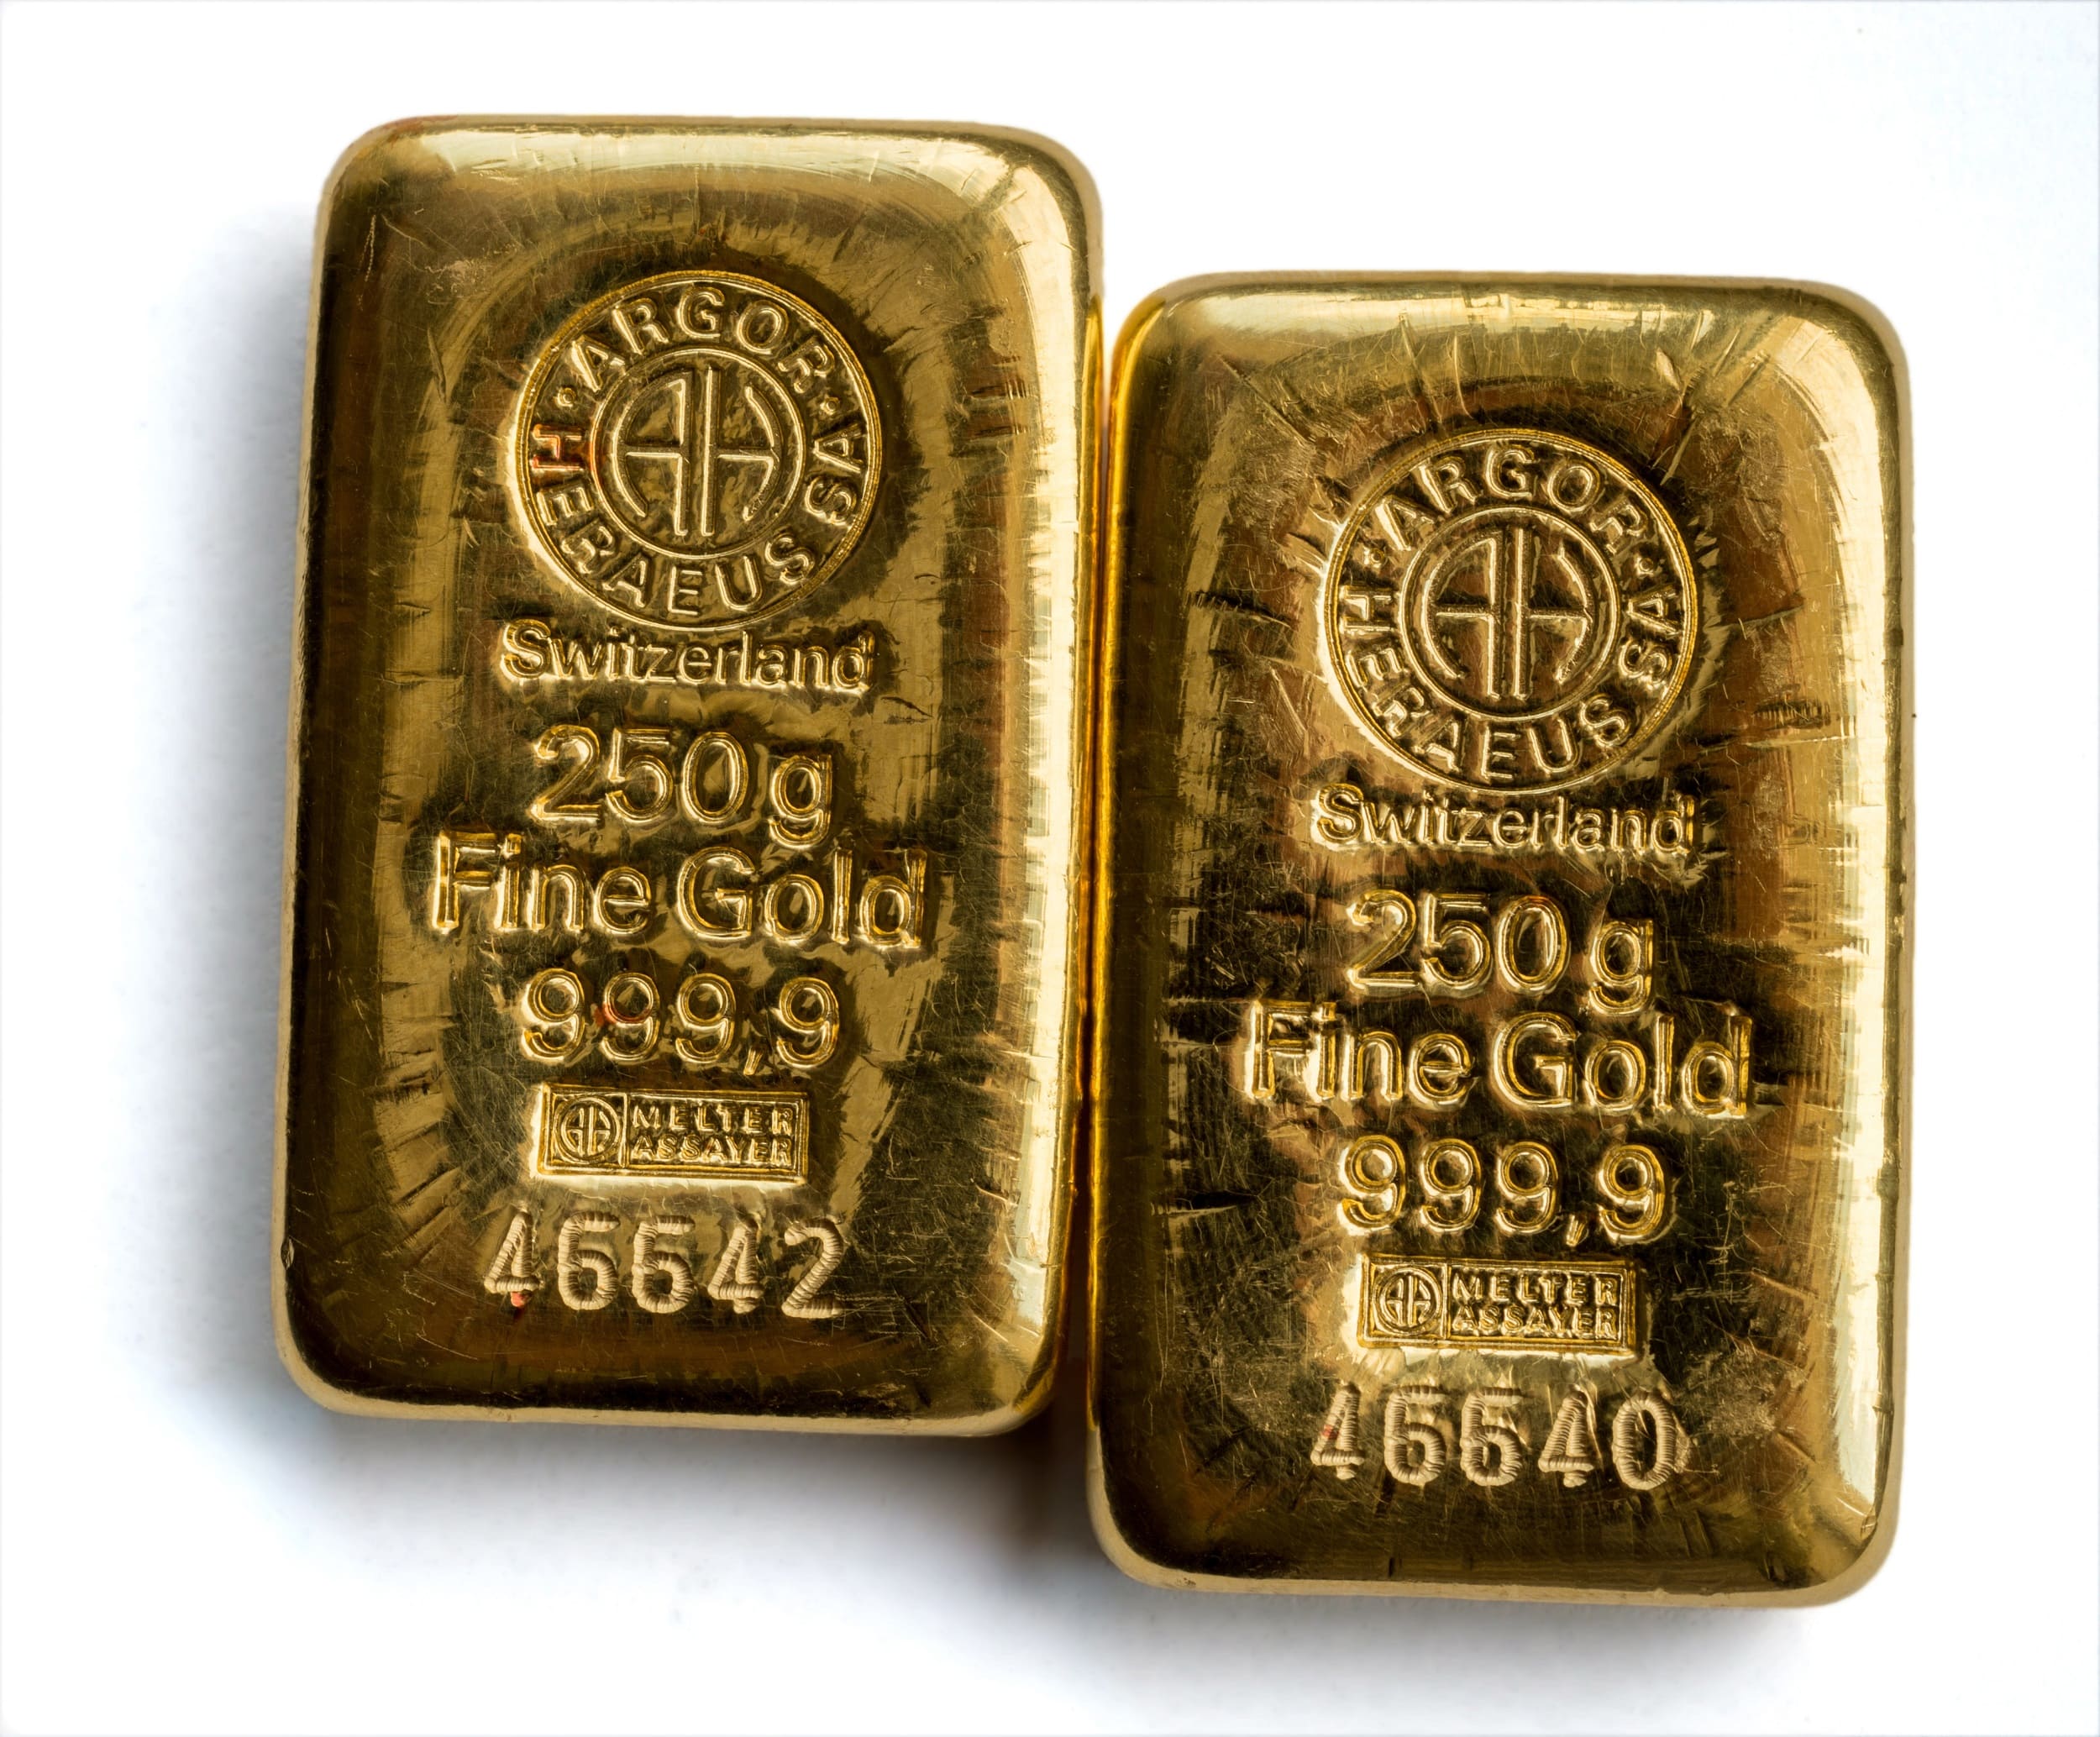 Two gold bars weighing 250 g each with a fineness of 999.9